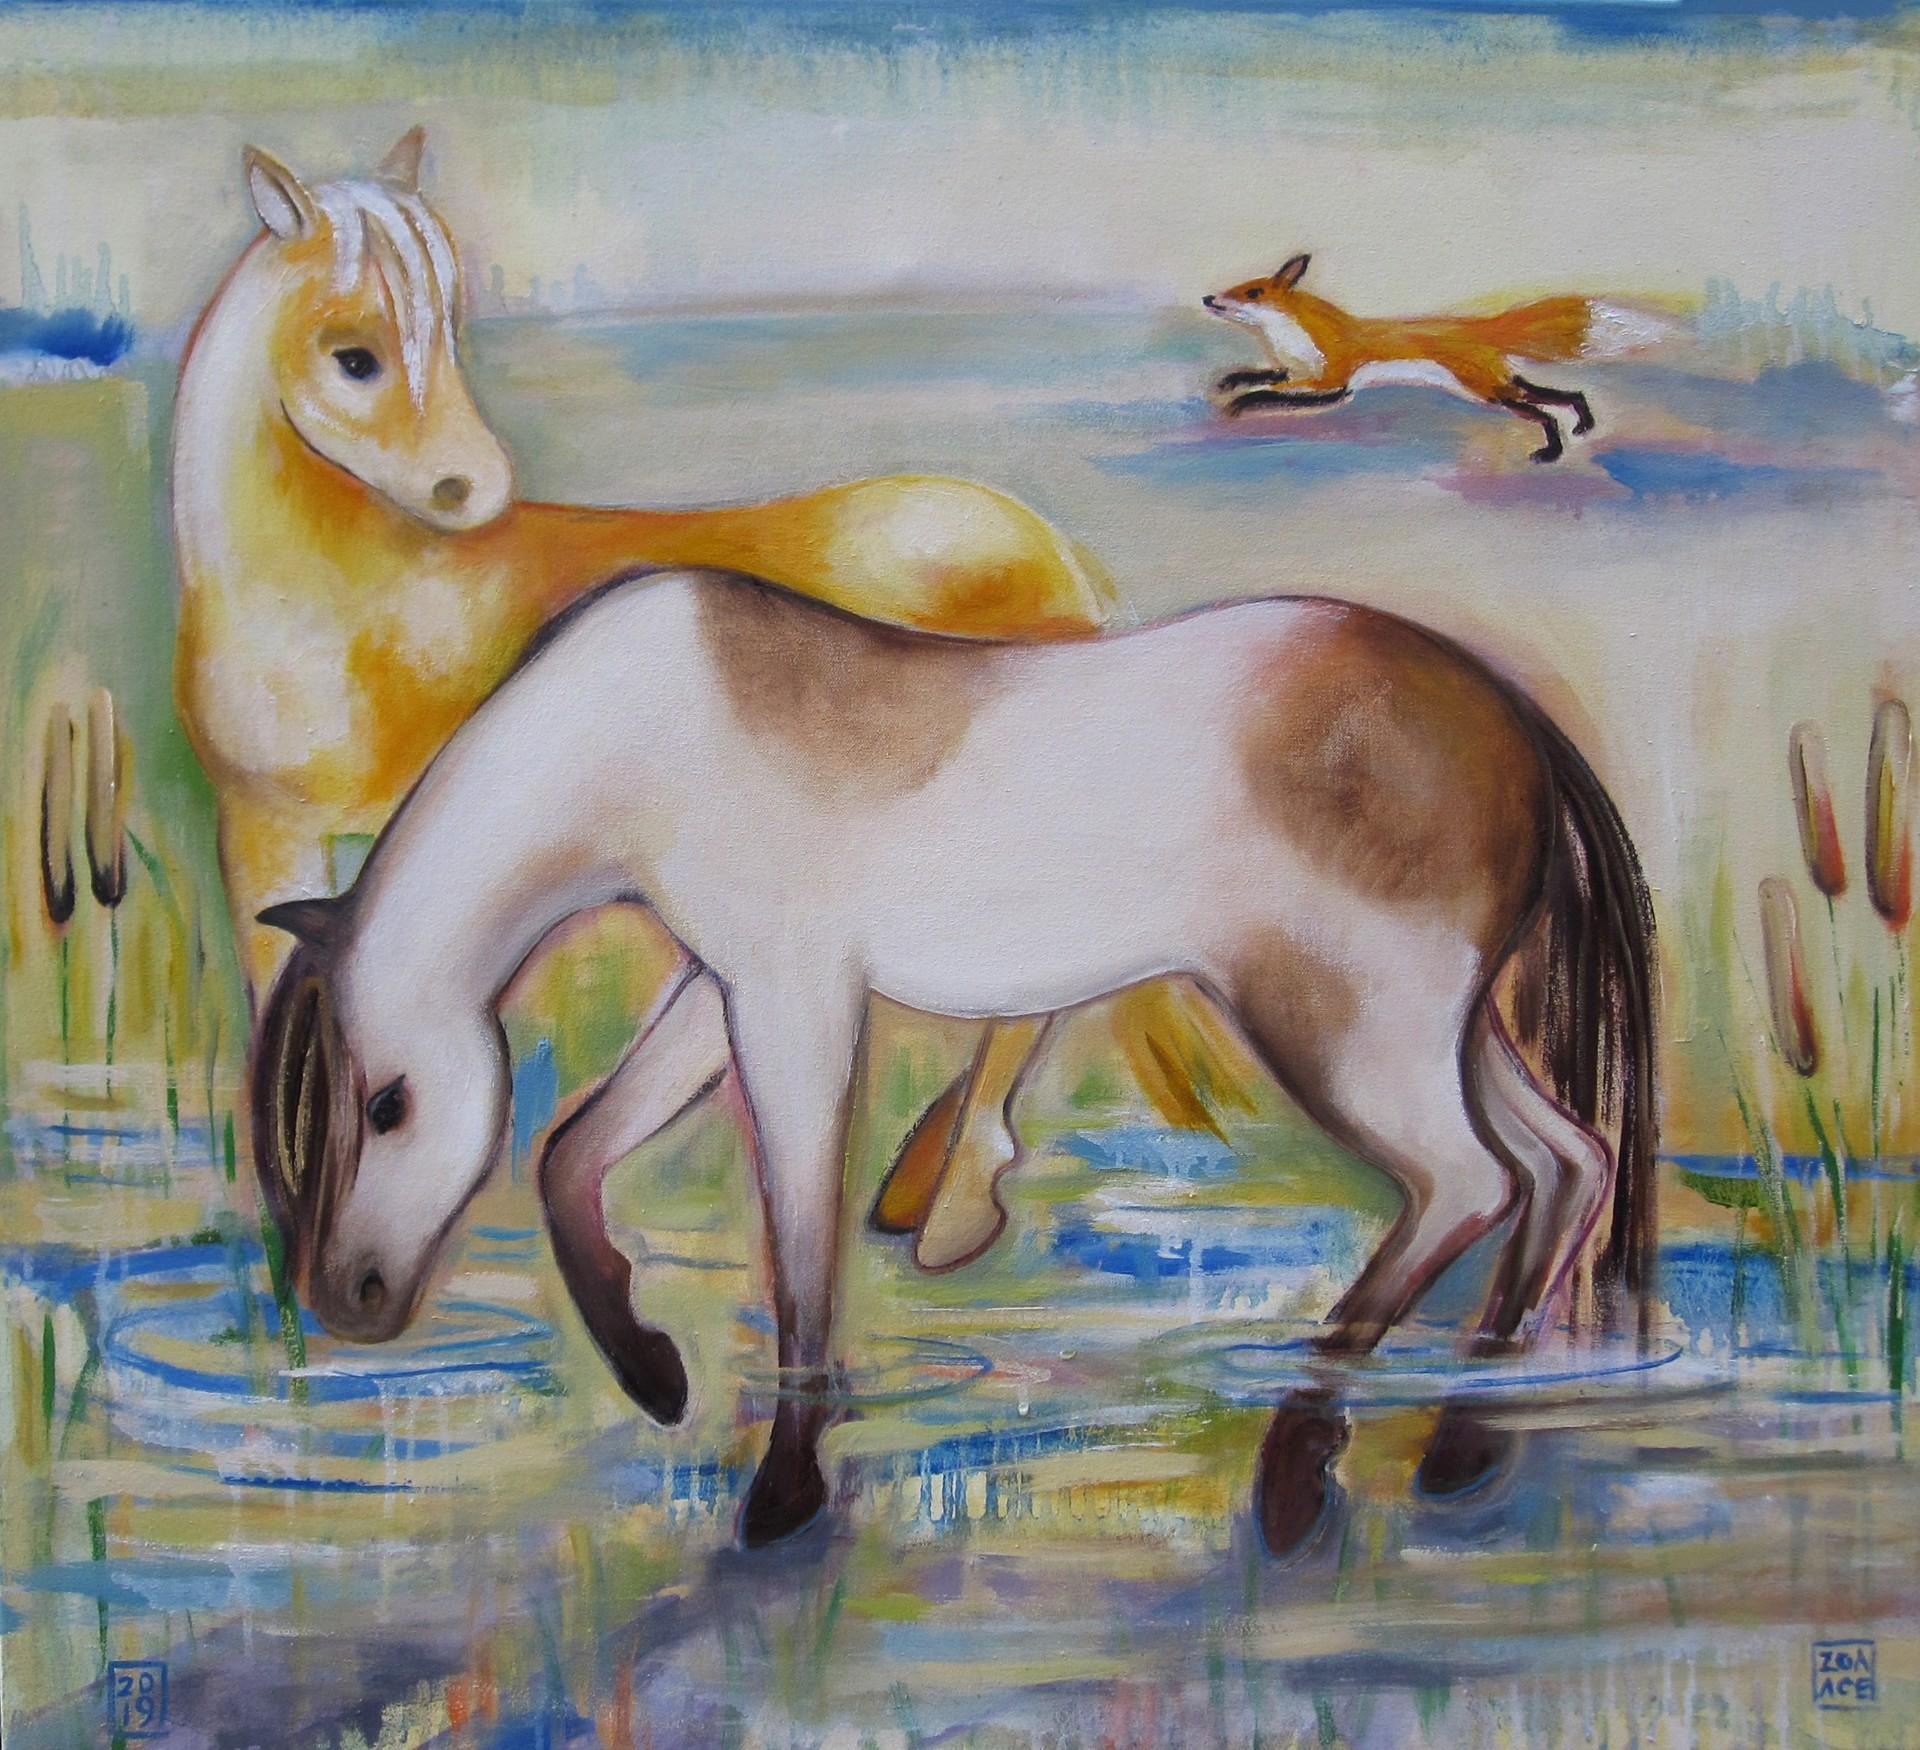 Zoa Ace Figurative Painting - In the Marsh